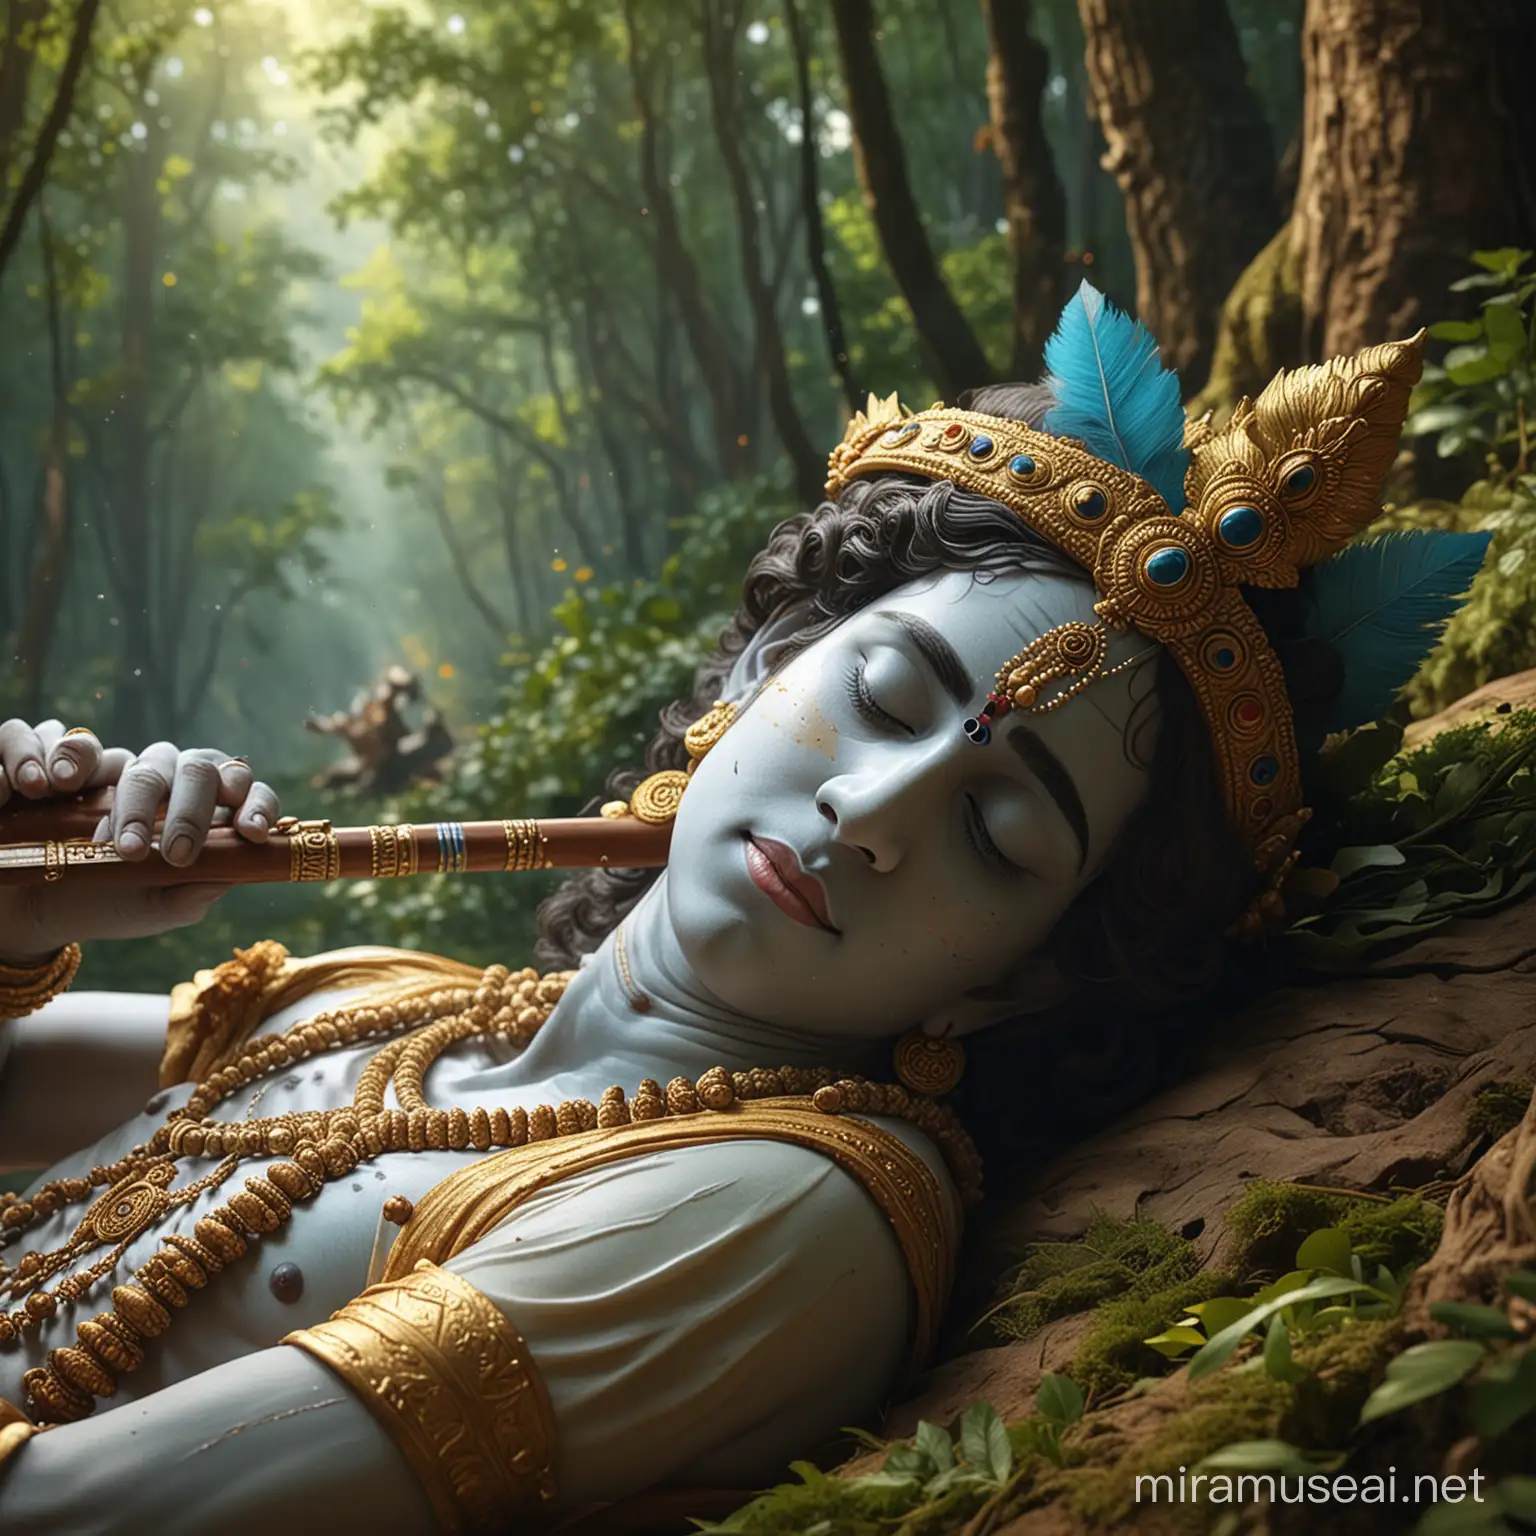 A detailed, hyper-realistic image of Lord krishna . lord krishna sleeping and, lord krishna , lord krishna with flute,lord krishna in vrindavan forest, lord krishna and full HD. 4k high quality.